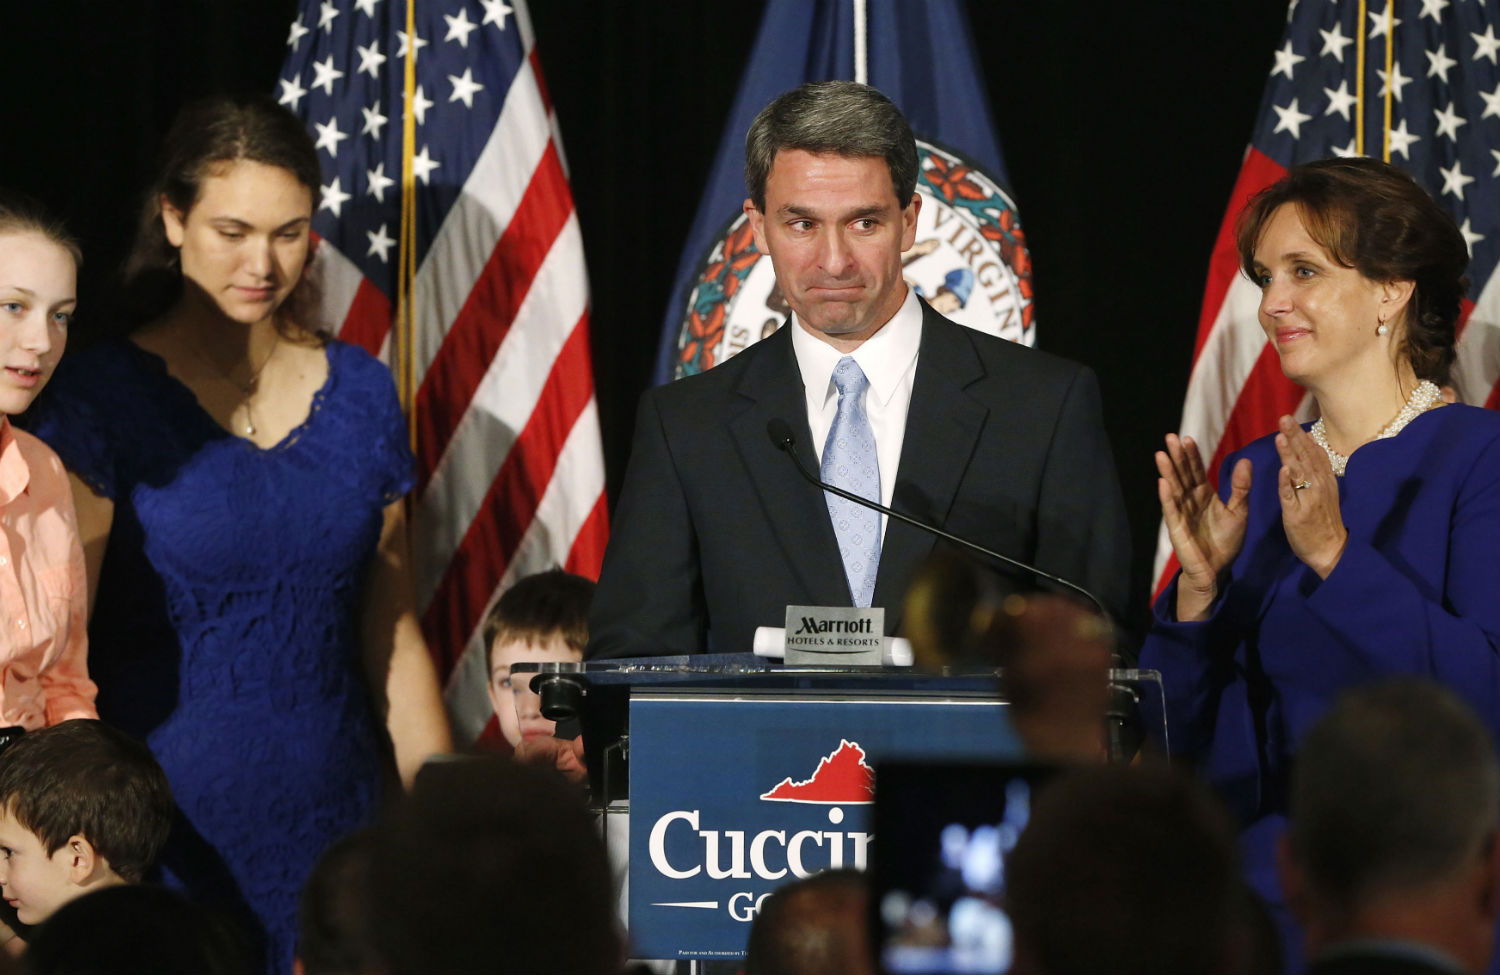 The Right Thinks Anti-Gay, Anti-Choice Cuccinelli Wasn’t Conservative Enough